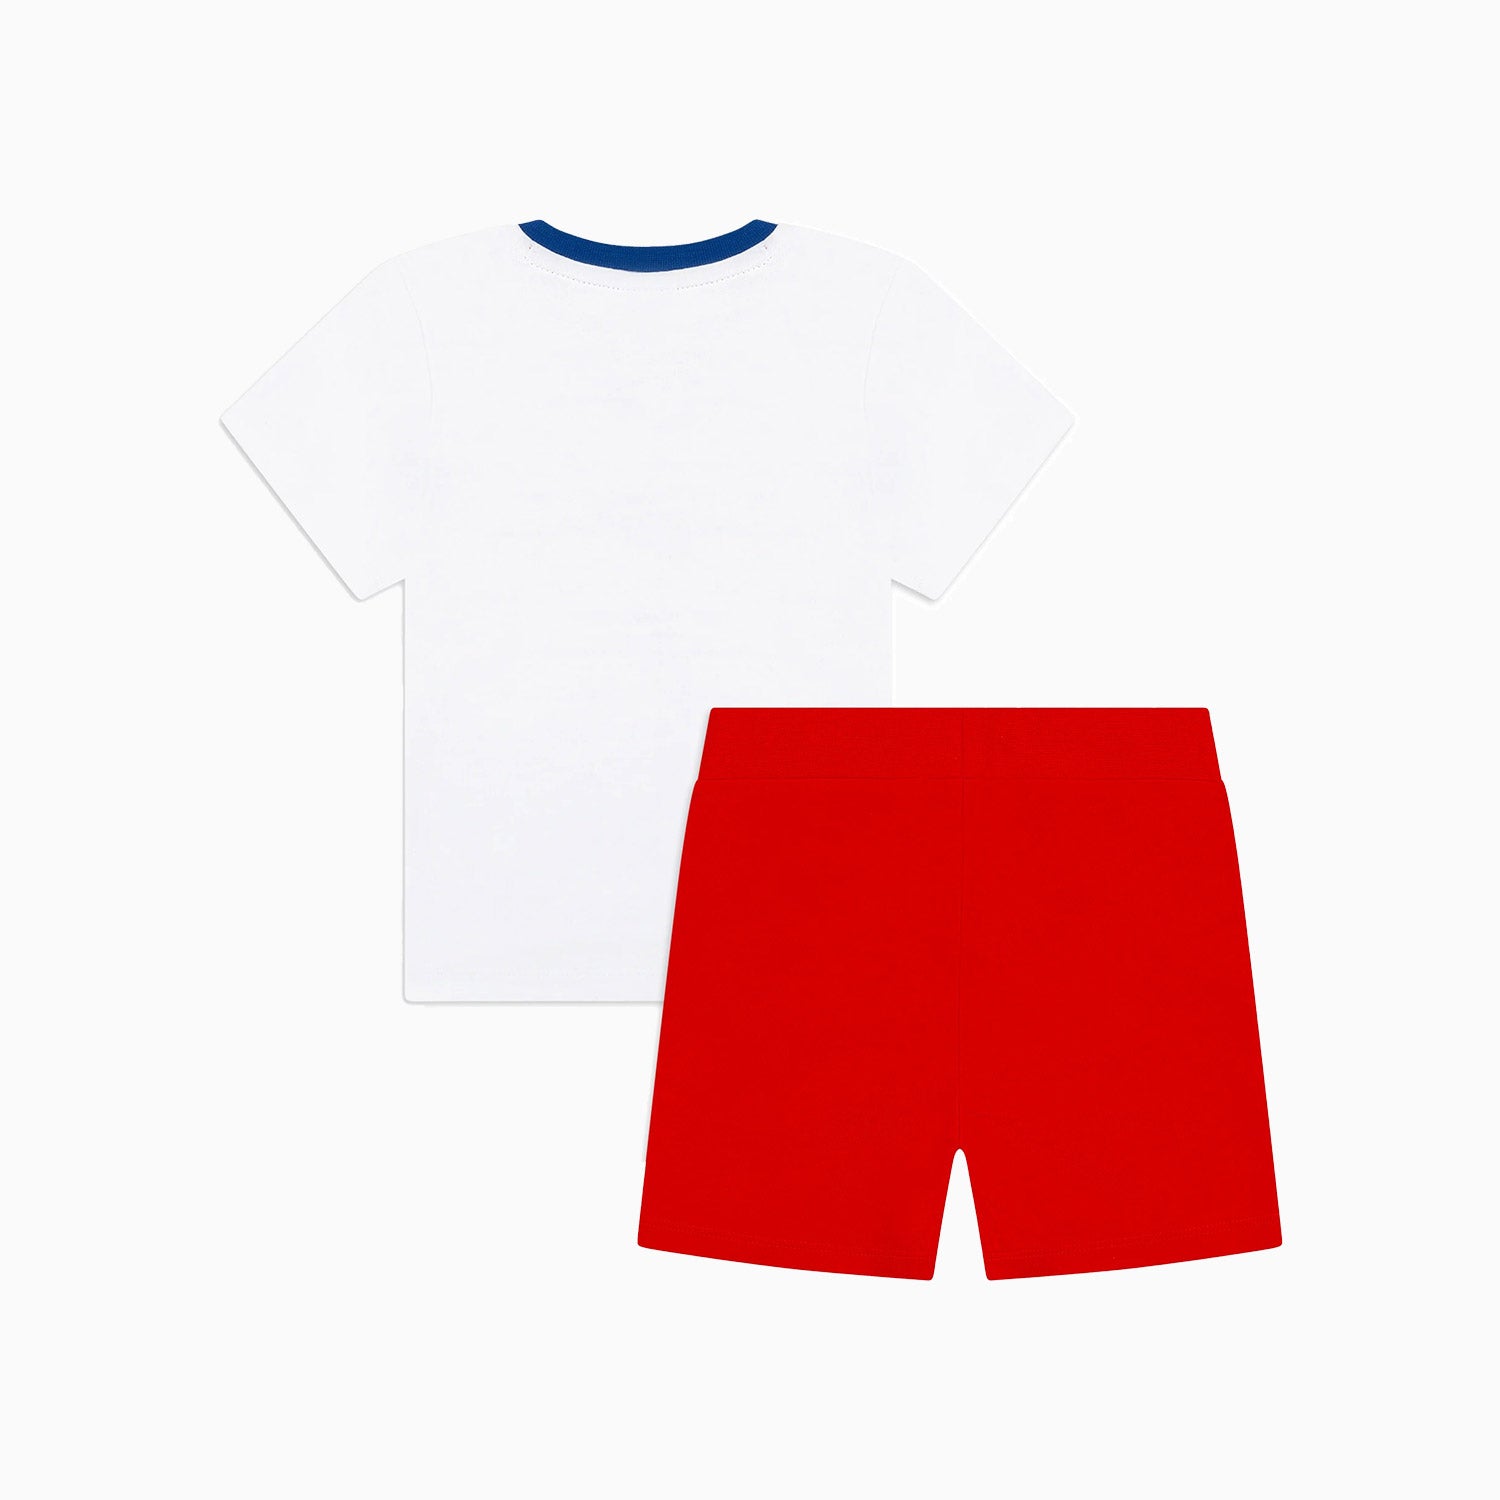 Hugo Boss Kid's T Shirt And Shorts Outfit Toddlers - Color: Electric Blue, Bright Red - Kids Premium Clothing -